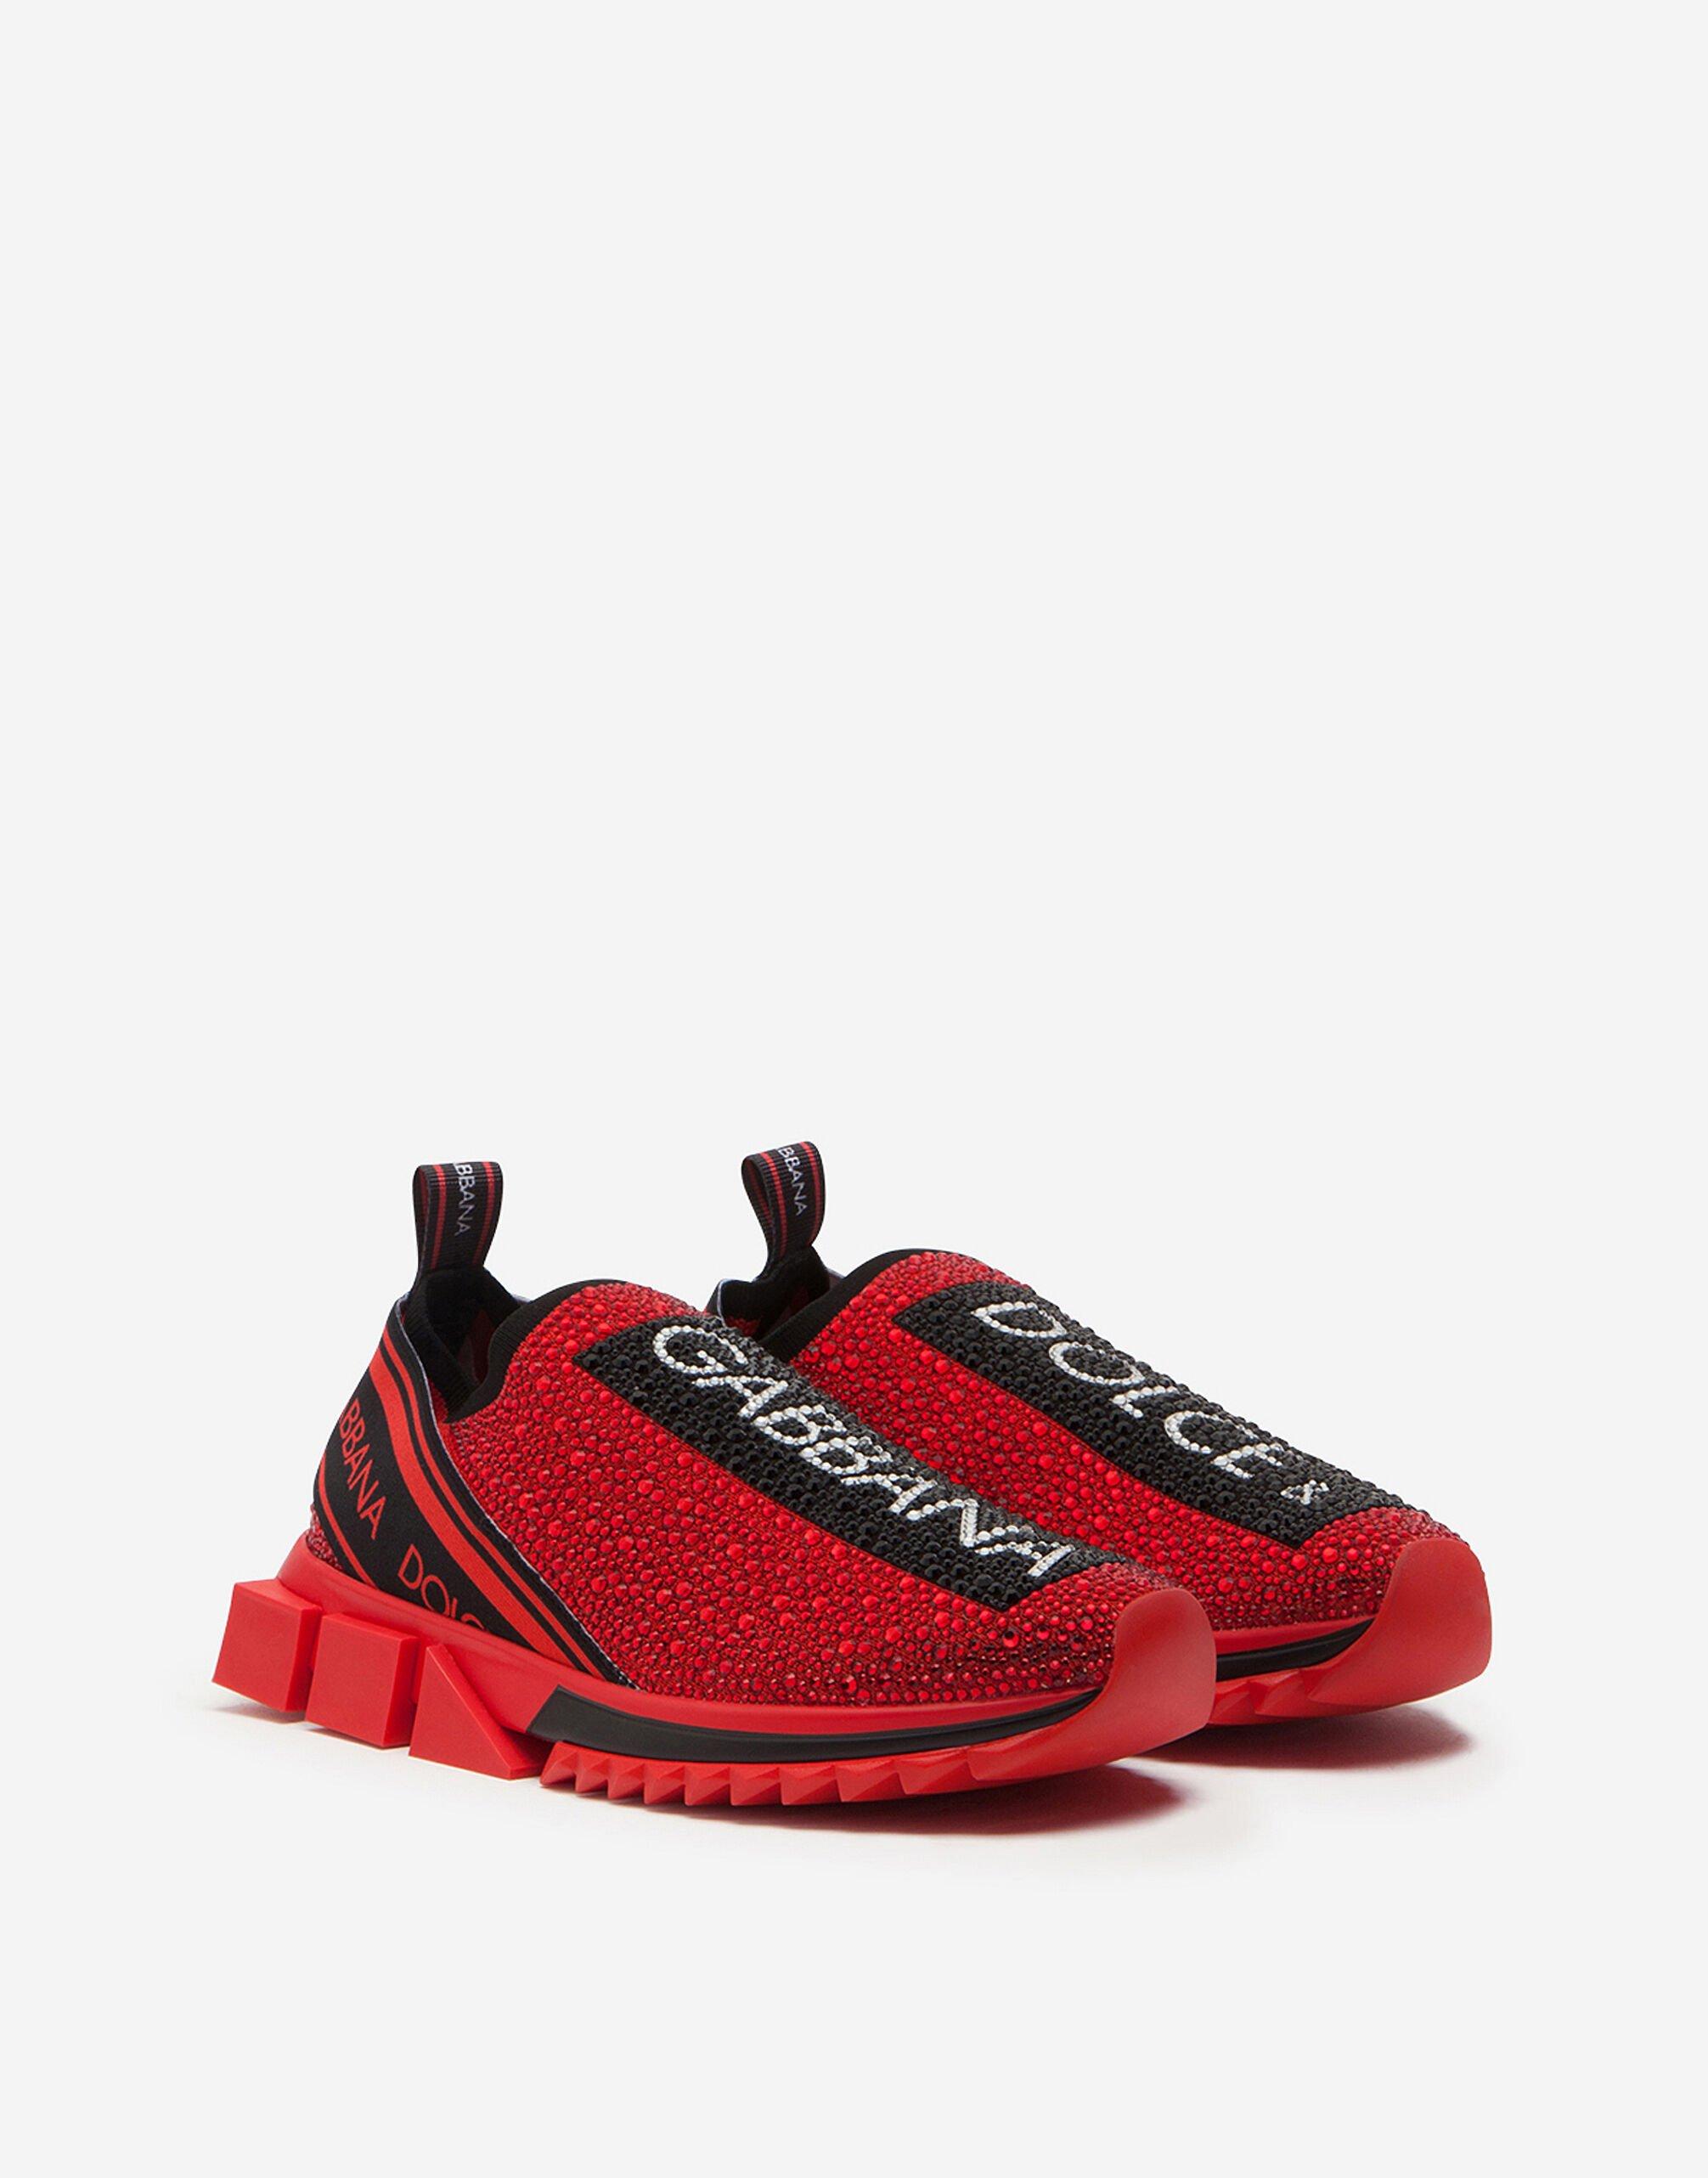 Dolce & Gabbana Leather Sorrento Termostrass Sneakers in Red | Lyst